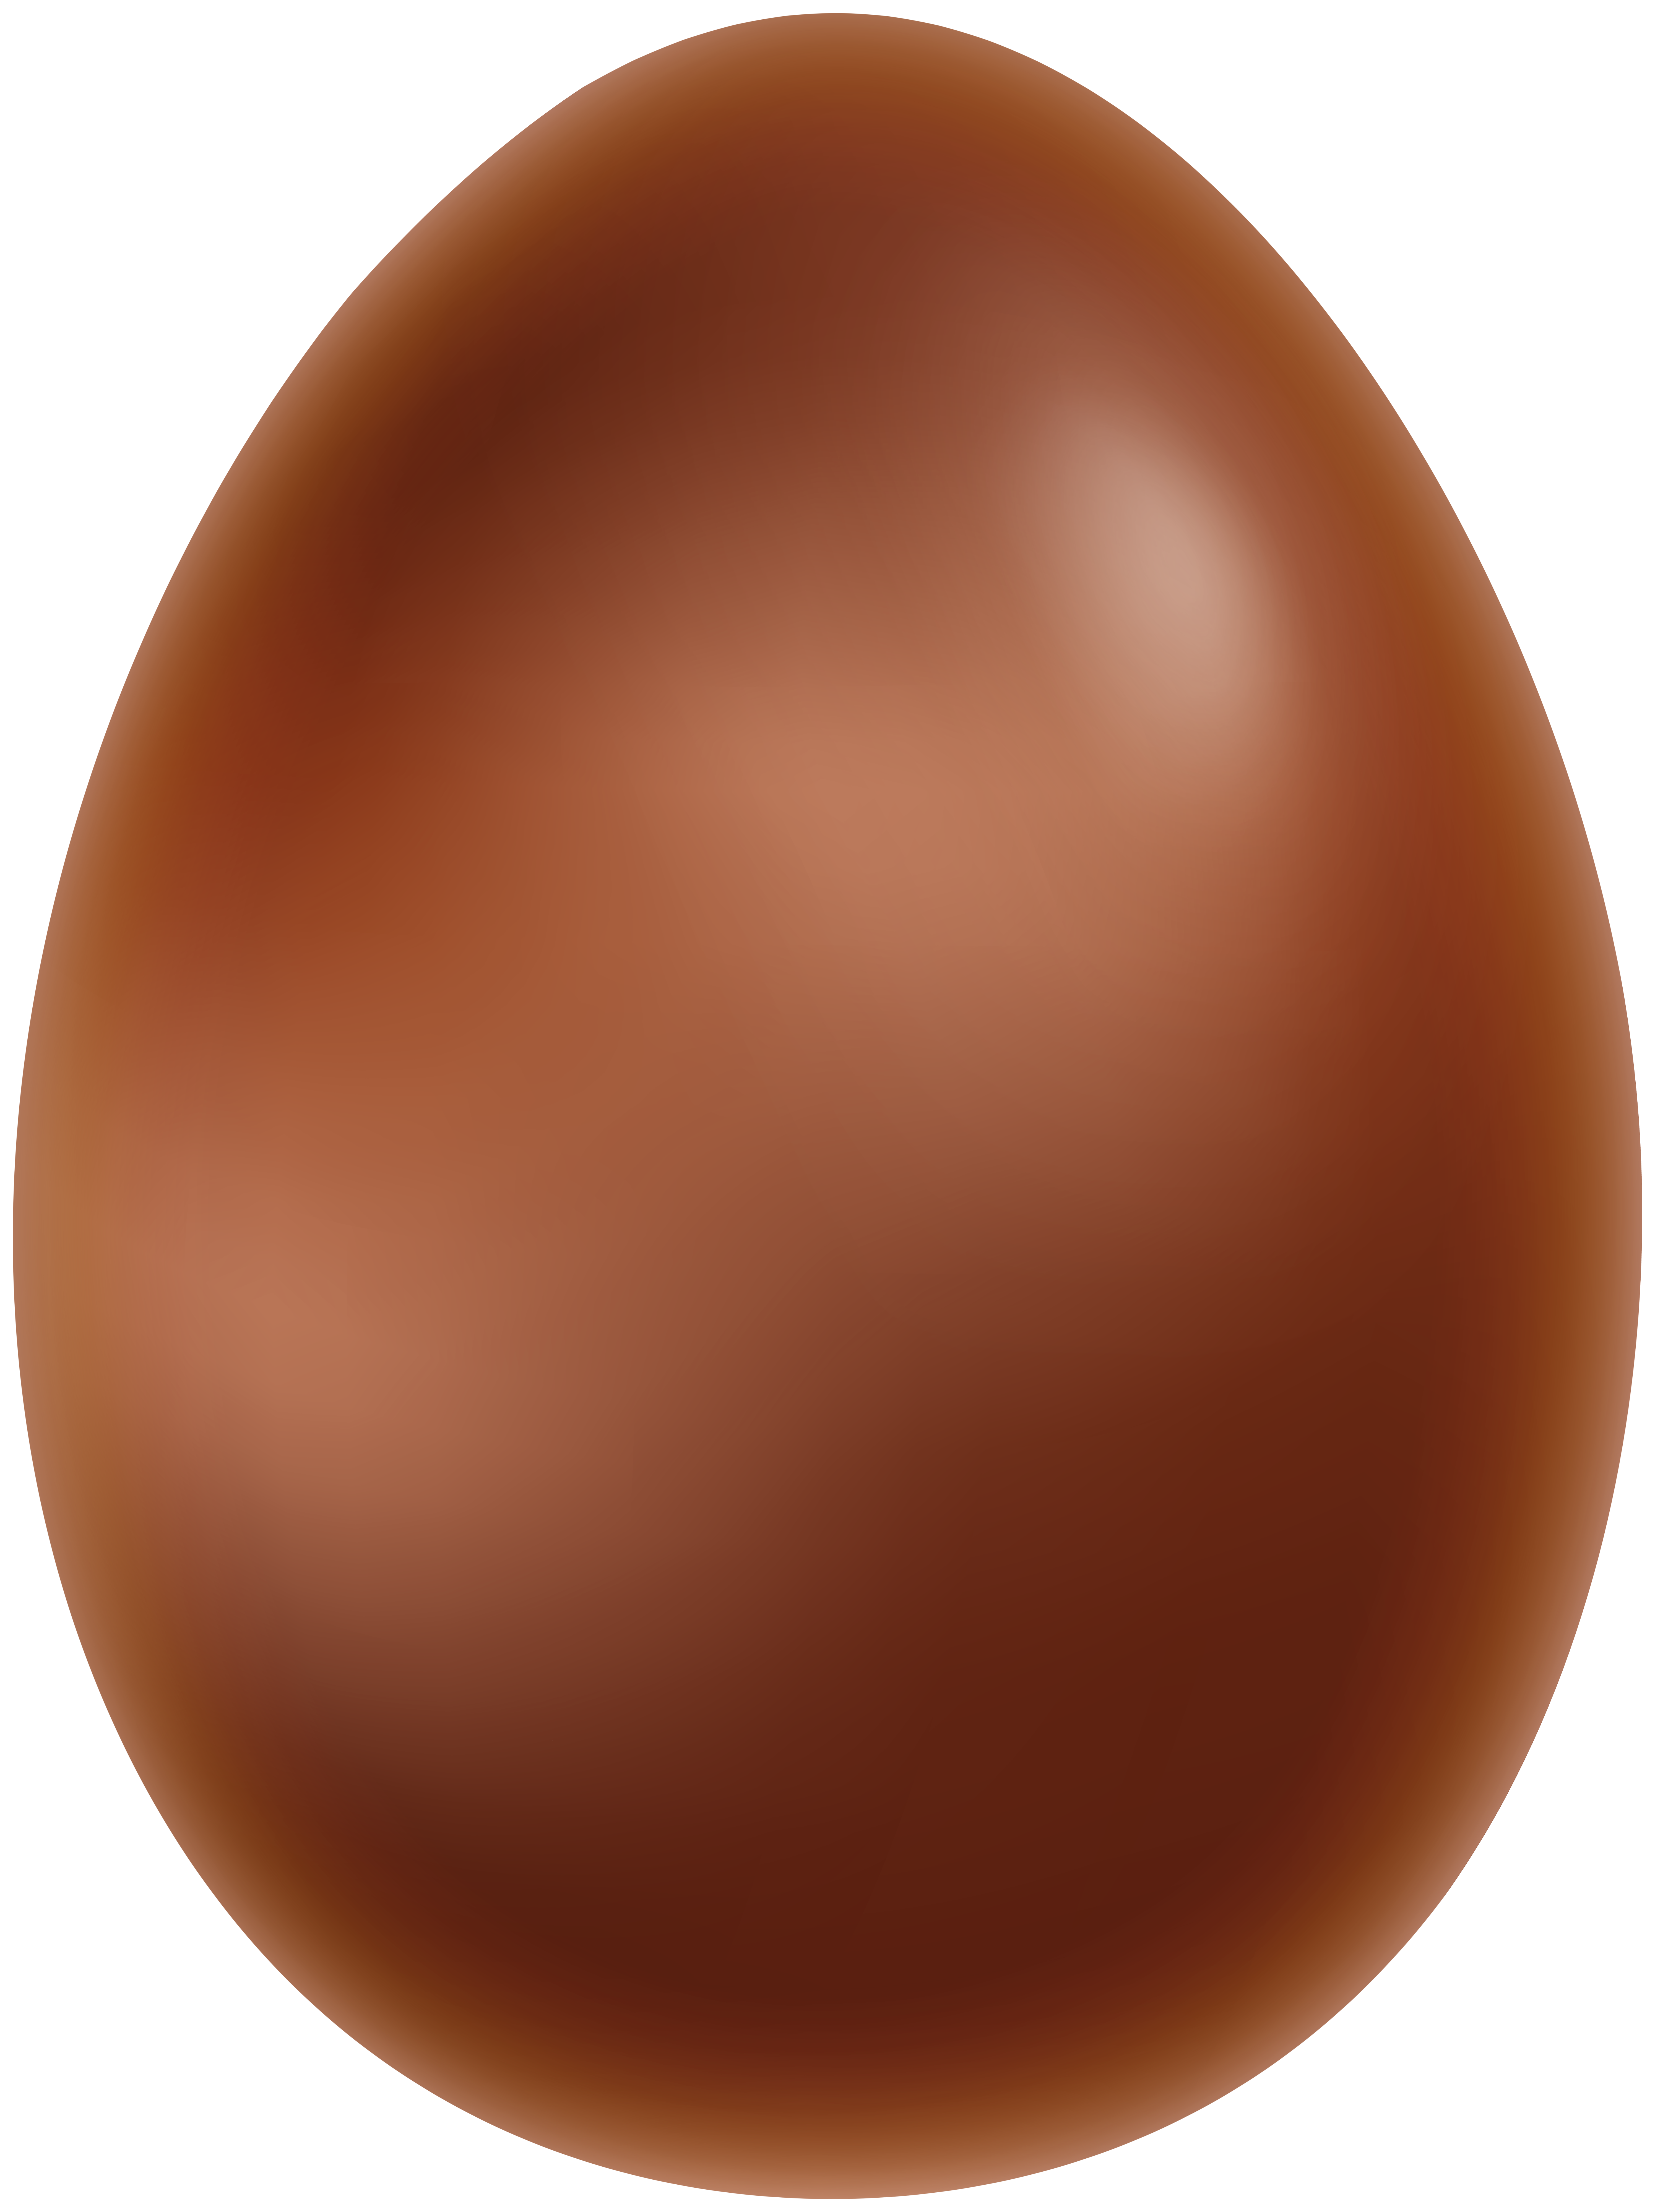 Chocolate Egg PNG and Chocolate Egg Transparent Clipart Free